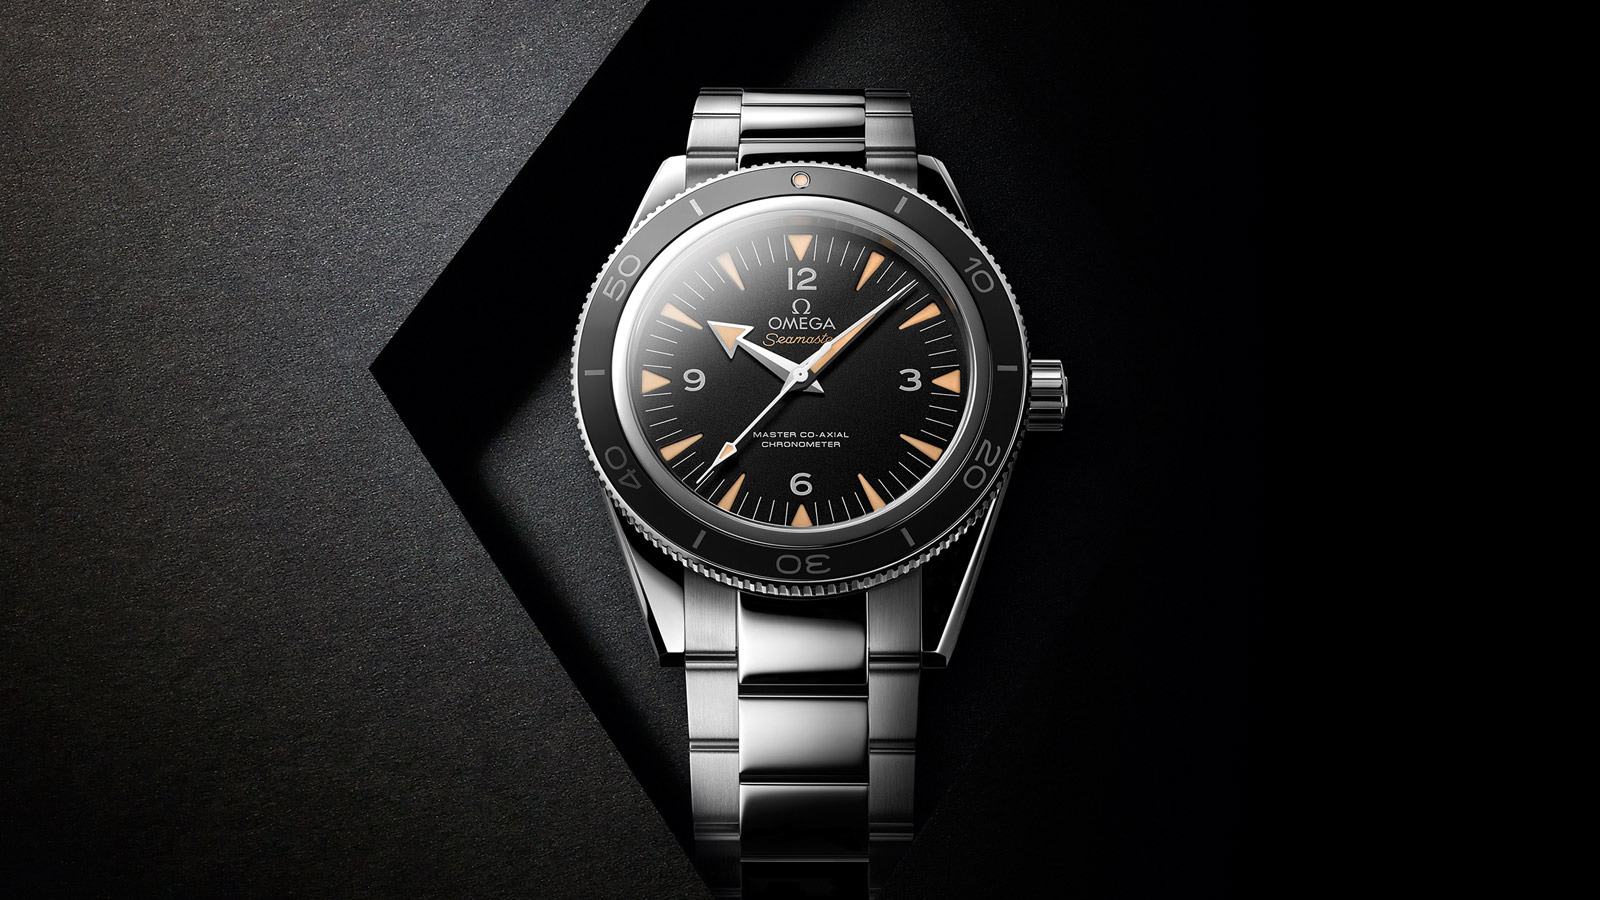 The accuracy has been guaranteed by the precise and reliable Omega Master Co-Axial movement.